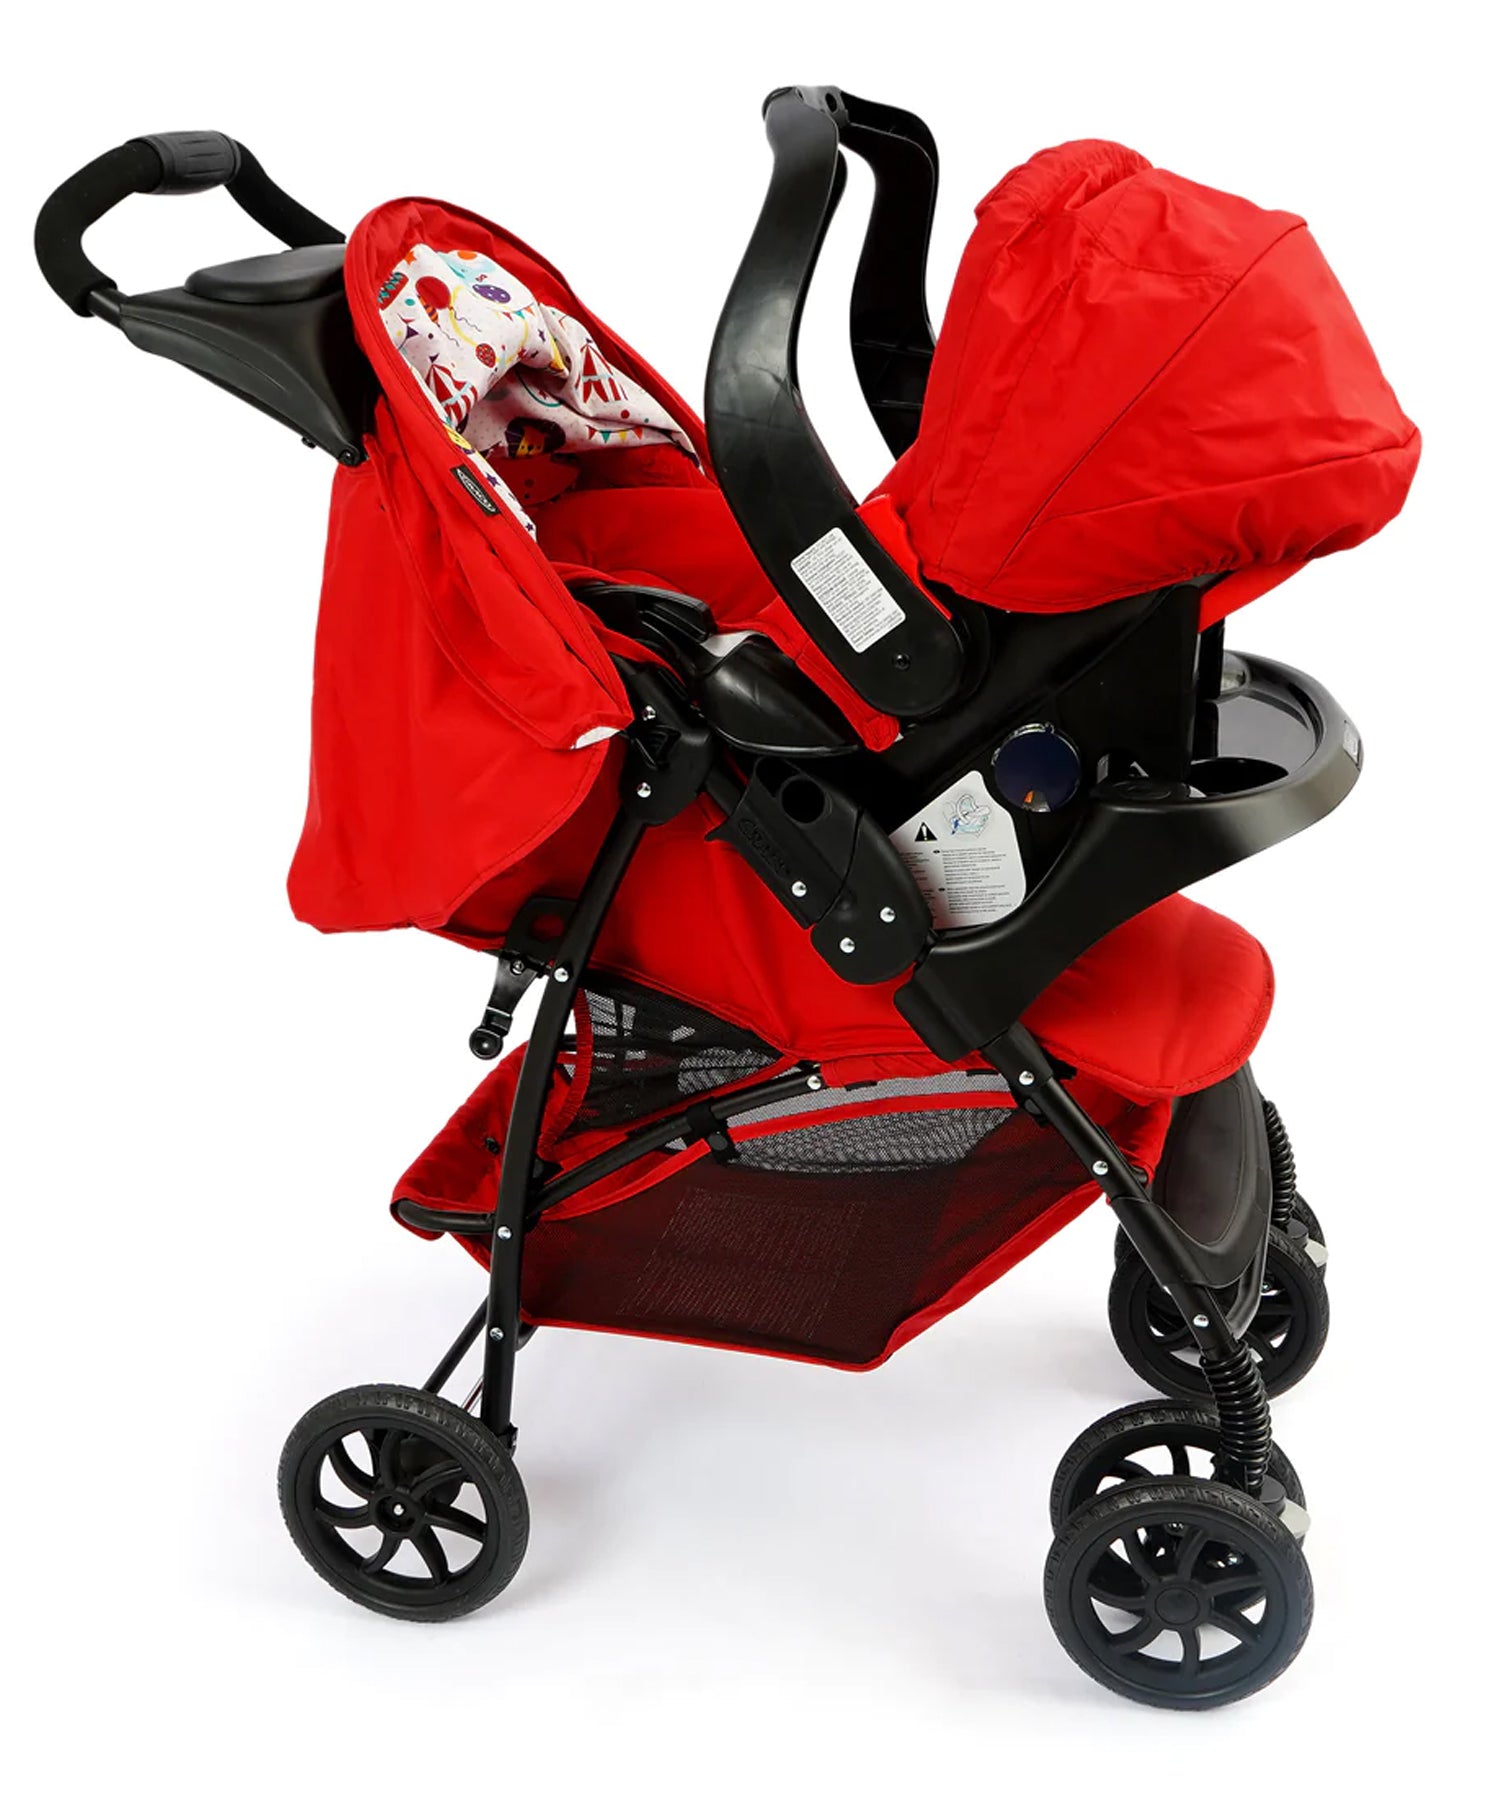 GRACO TRAVEL SYSTEM - S-85